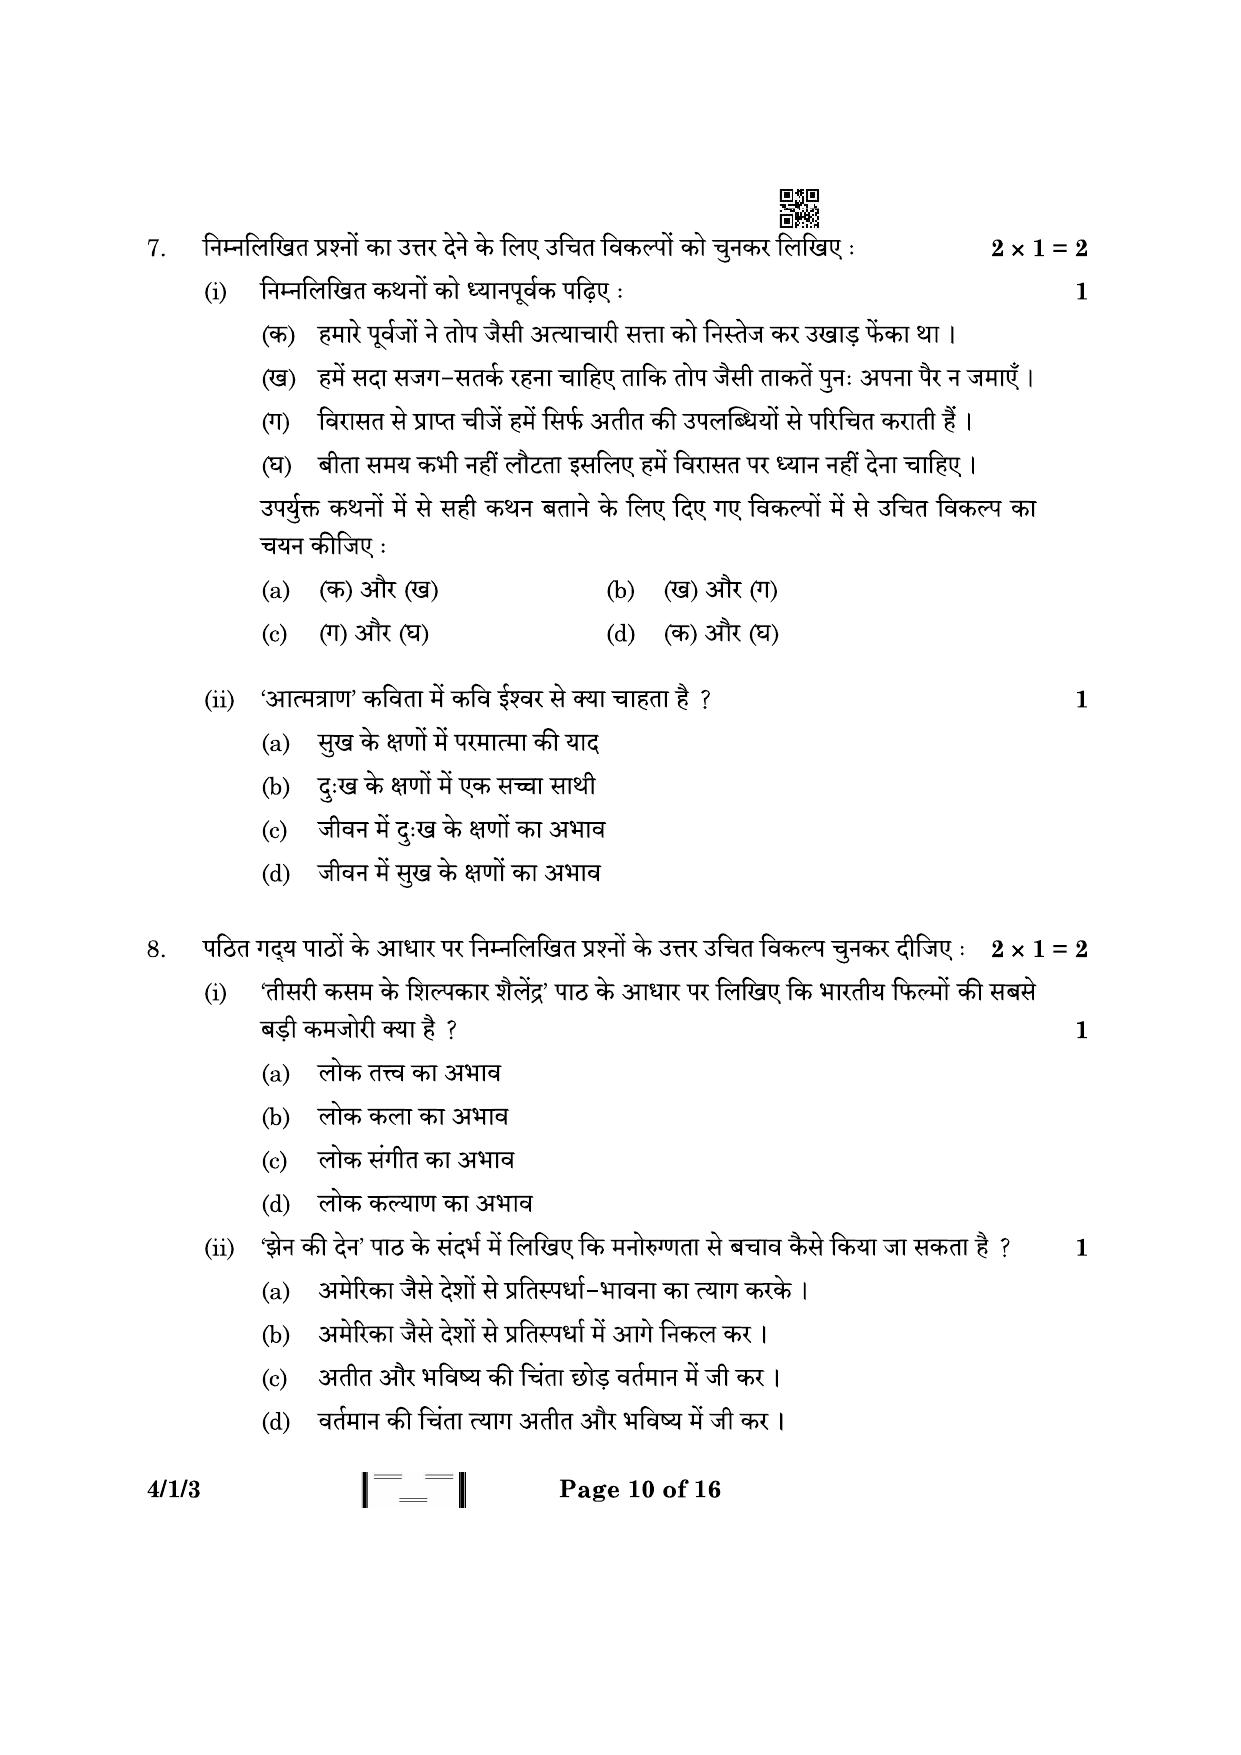 CBSE Class 10 4-1-3 Hindi B 2023 Question Paper - Page 10